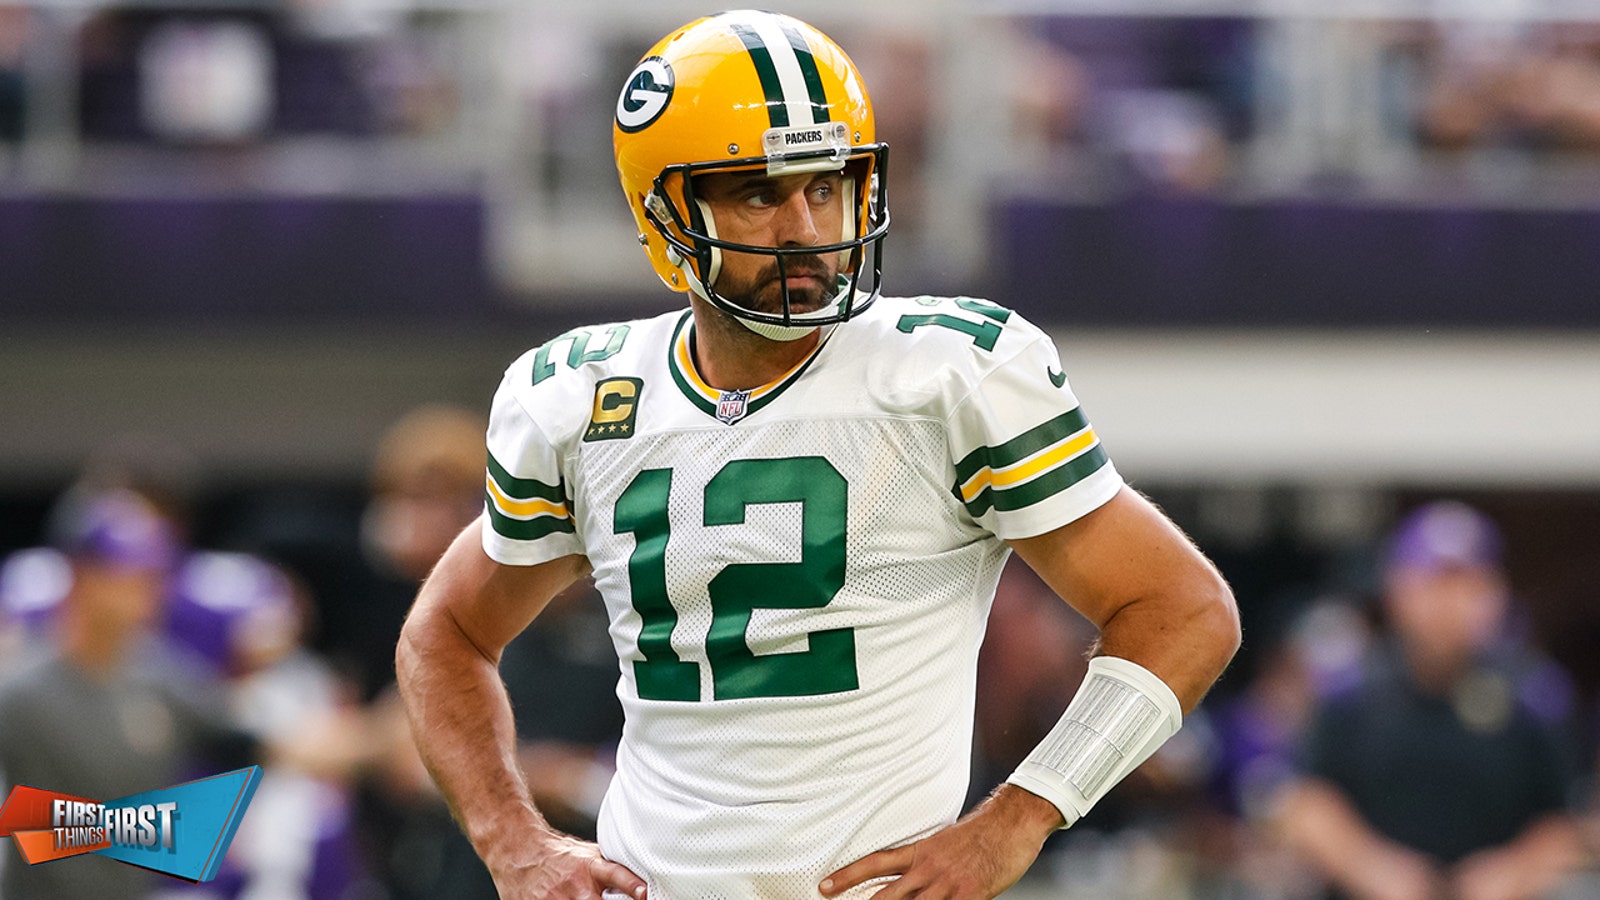 Rodgers vows to "get on the same frequency" as Packers' WRs